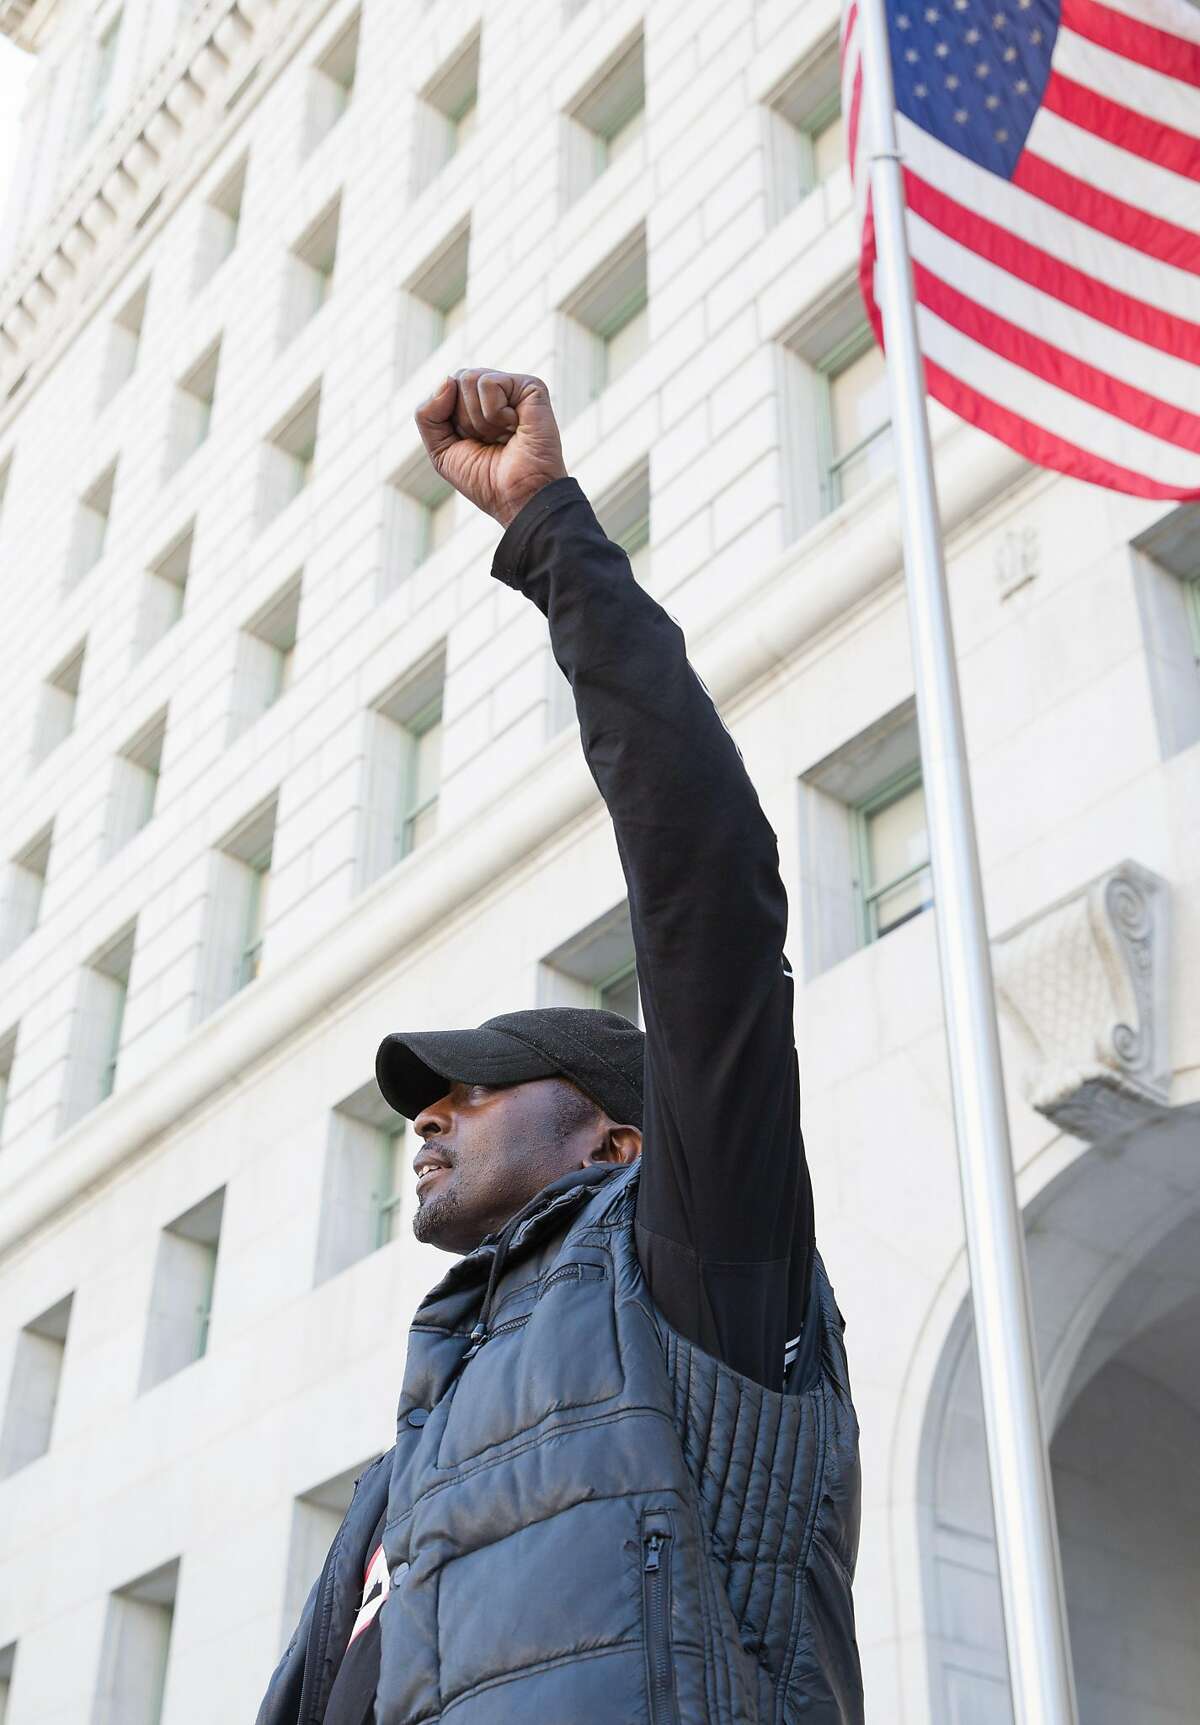 LOS ANGELES, CA - JUNE 12, 2019: Quintus Moore participates in a weekly protest outside the L.A. Hall of Justice, organized by LA Black Lives Matter, and is an activist for laws that would make it more difficult for law enforcement officers to resort to deadly force.